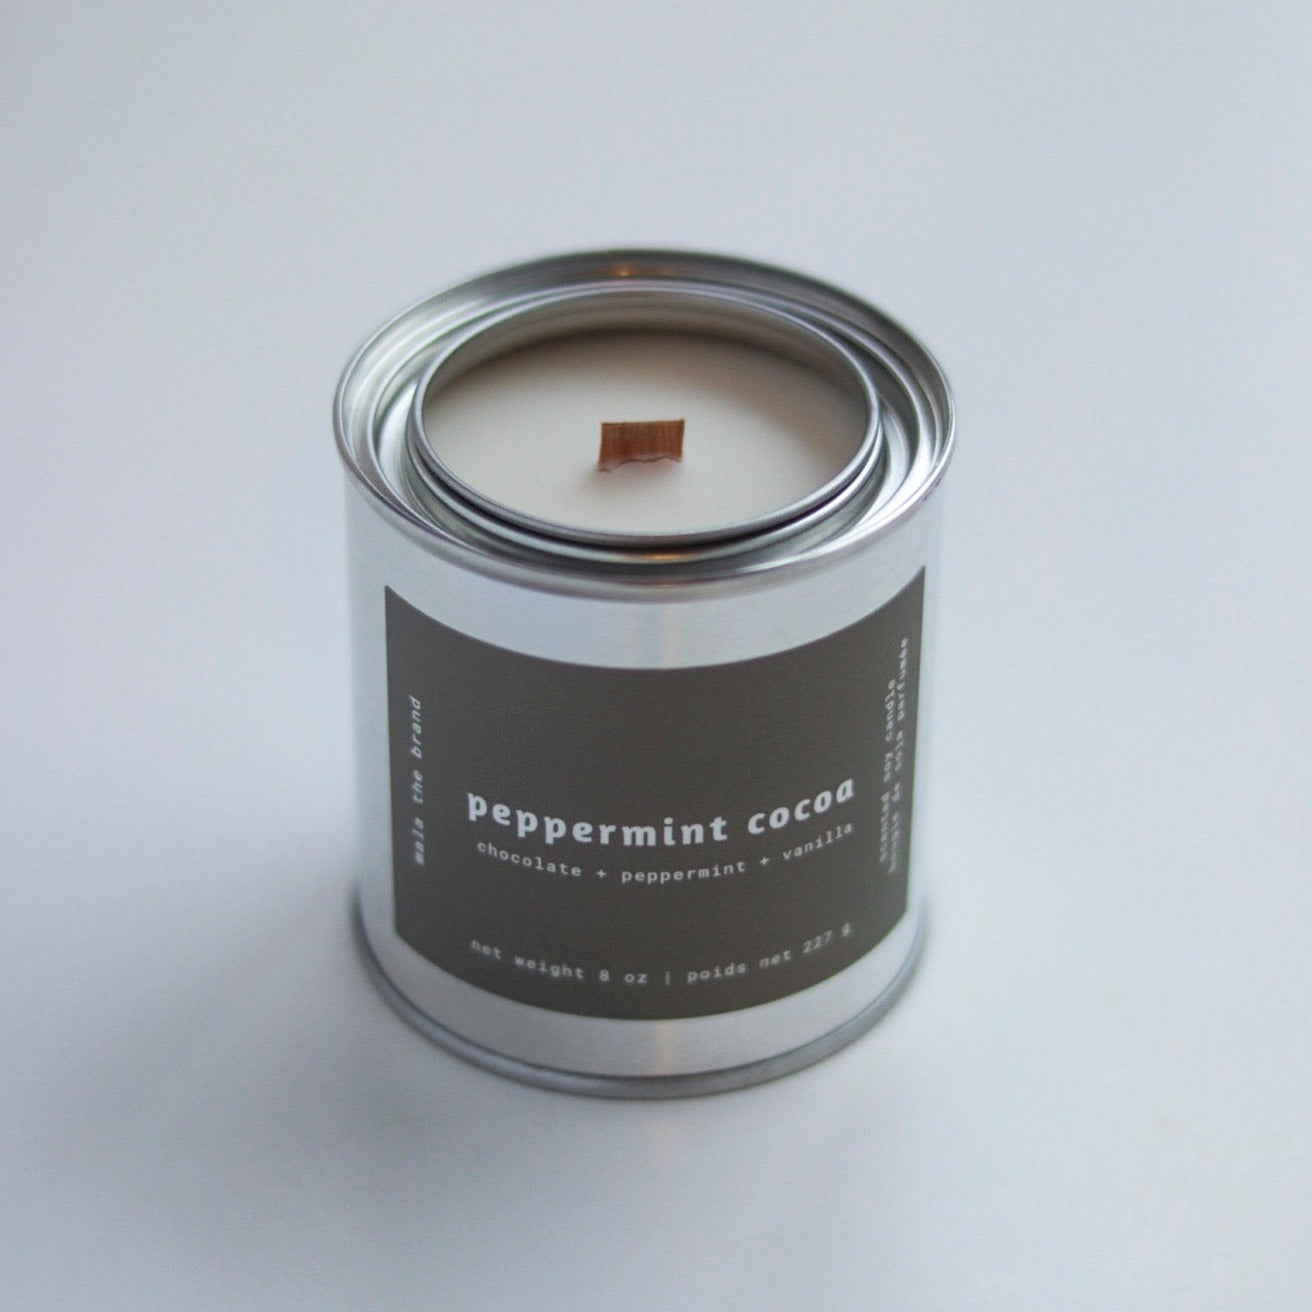 Candle - Peppermint Cocoa